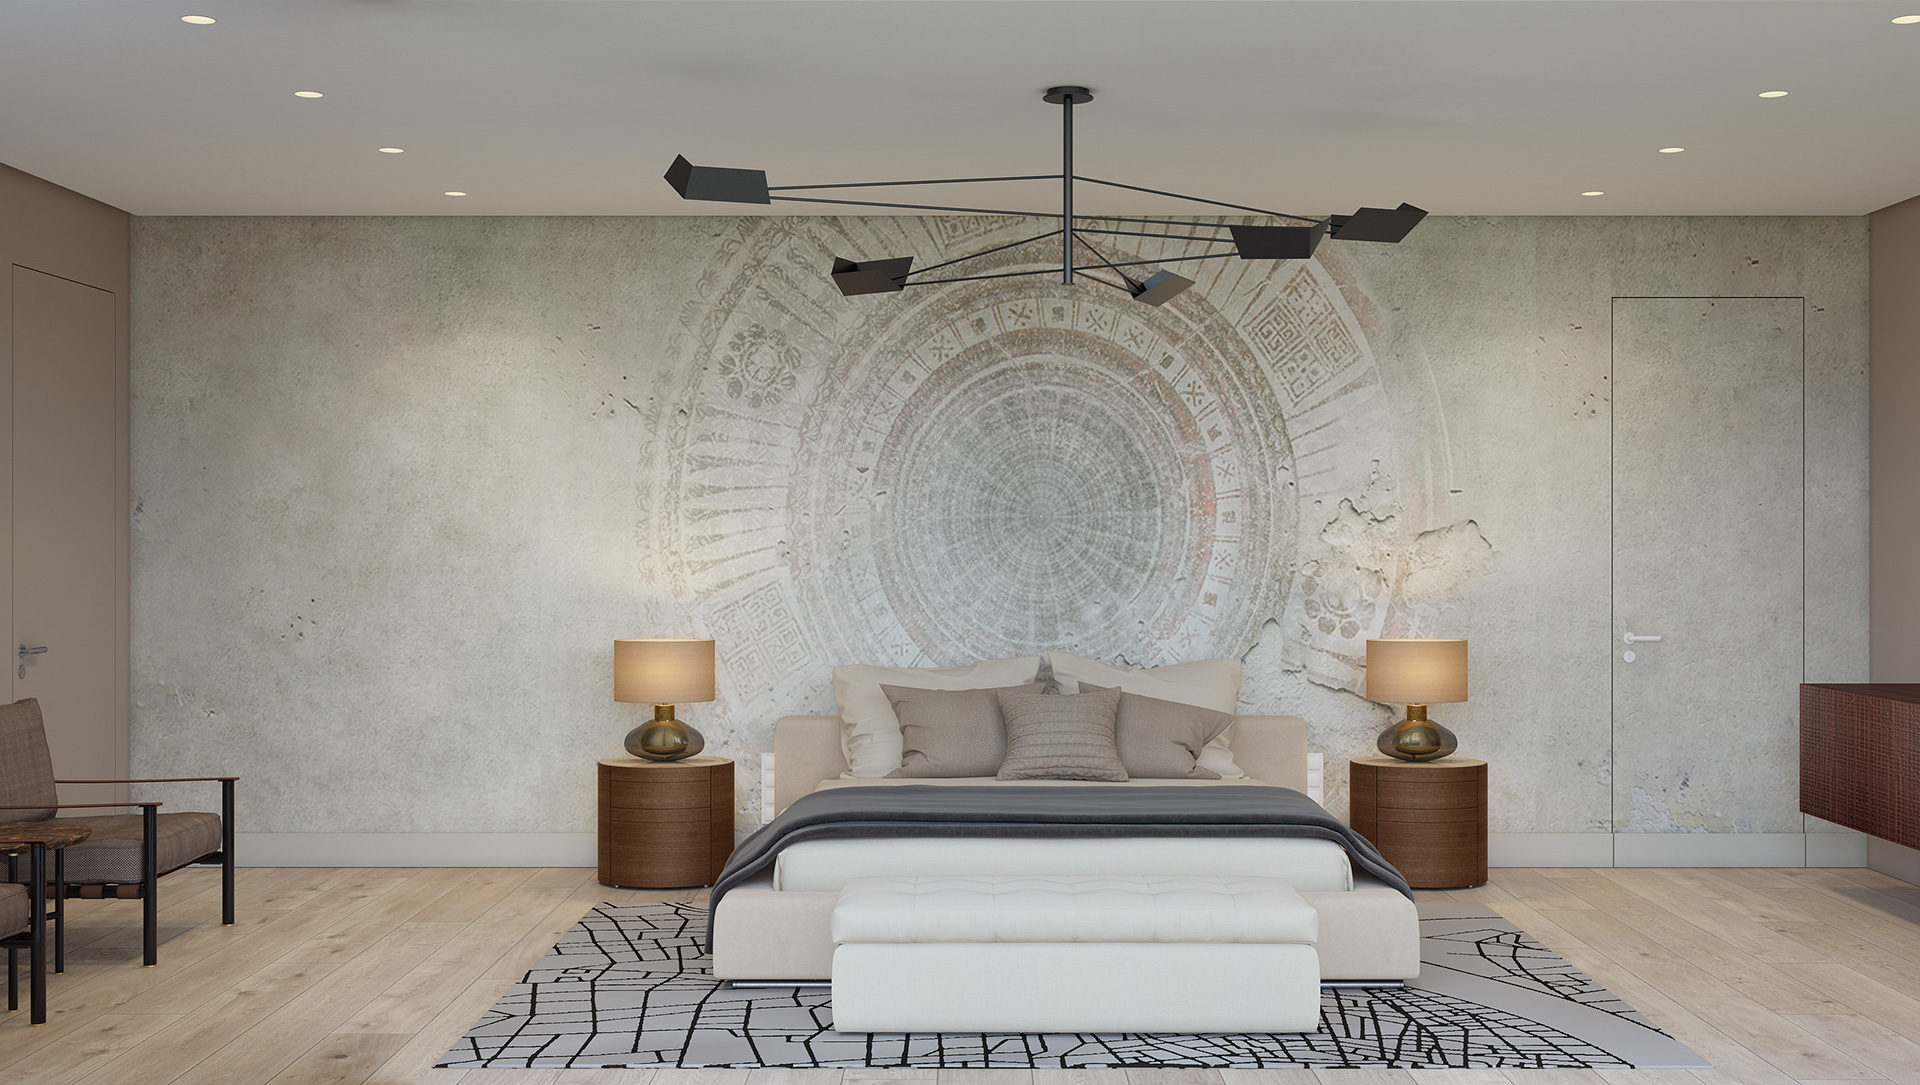 modern gray bedroom "width =" 1920 "height =" 1085 "srcset =" https://mileray.com/wp-content/uploads/2020/05/1588508702_444_Luxury-Bedroom-Designs-With-Modern-and-Contemporary-Interior-Decorating-Ideas.jpg 1920w, https: // myfashionos. com / wp-content / uploads / 2016/11 / Taleh-Mehdisoy-1-300x170.jpg 300w, https://mileray.com/wp-content/uploads/2016/11/Taleh-Mehdisoy-1-768x434.jpg 768w, https://mileray.com/wp-content/uploads/2016/11/Taleh-Mehdisoy-1-1024x579.jpg 1024w, https://mileray.com/wp-content/uploads/2016/11/Taleh -Mehdisoy-1-696x393.jpg 696w, https://mileray.com/wp-content/uploads/2016/11/Taleh-Mehdisoy-1-1068x604.jpg 1068w, https://mileray.com/wp-content /uploads/2016/11/Taleh-Mehdisoy-1-743x420.jpg 743w "sizes =" (maximum width: 1920px) 100vw, 1920px